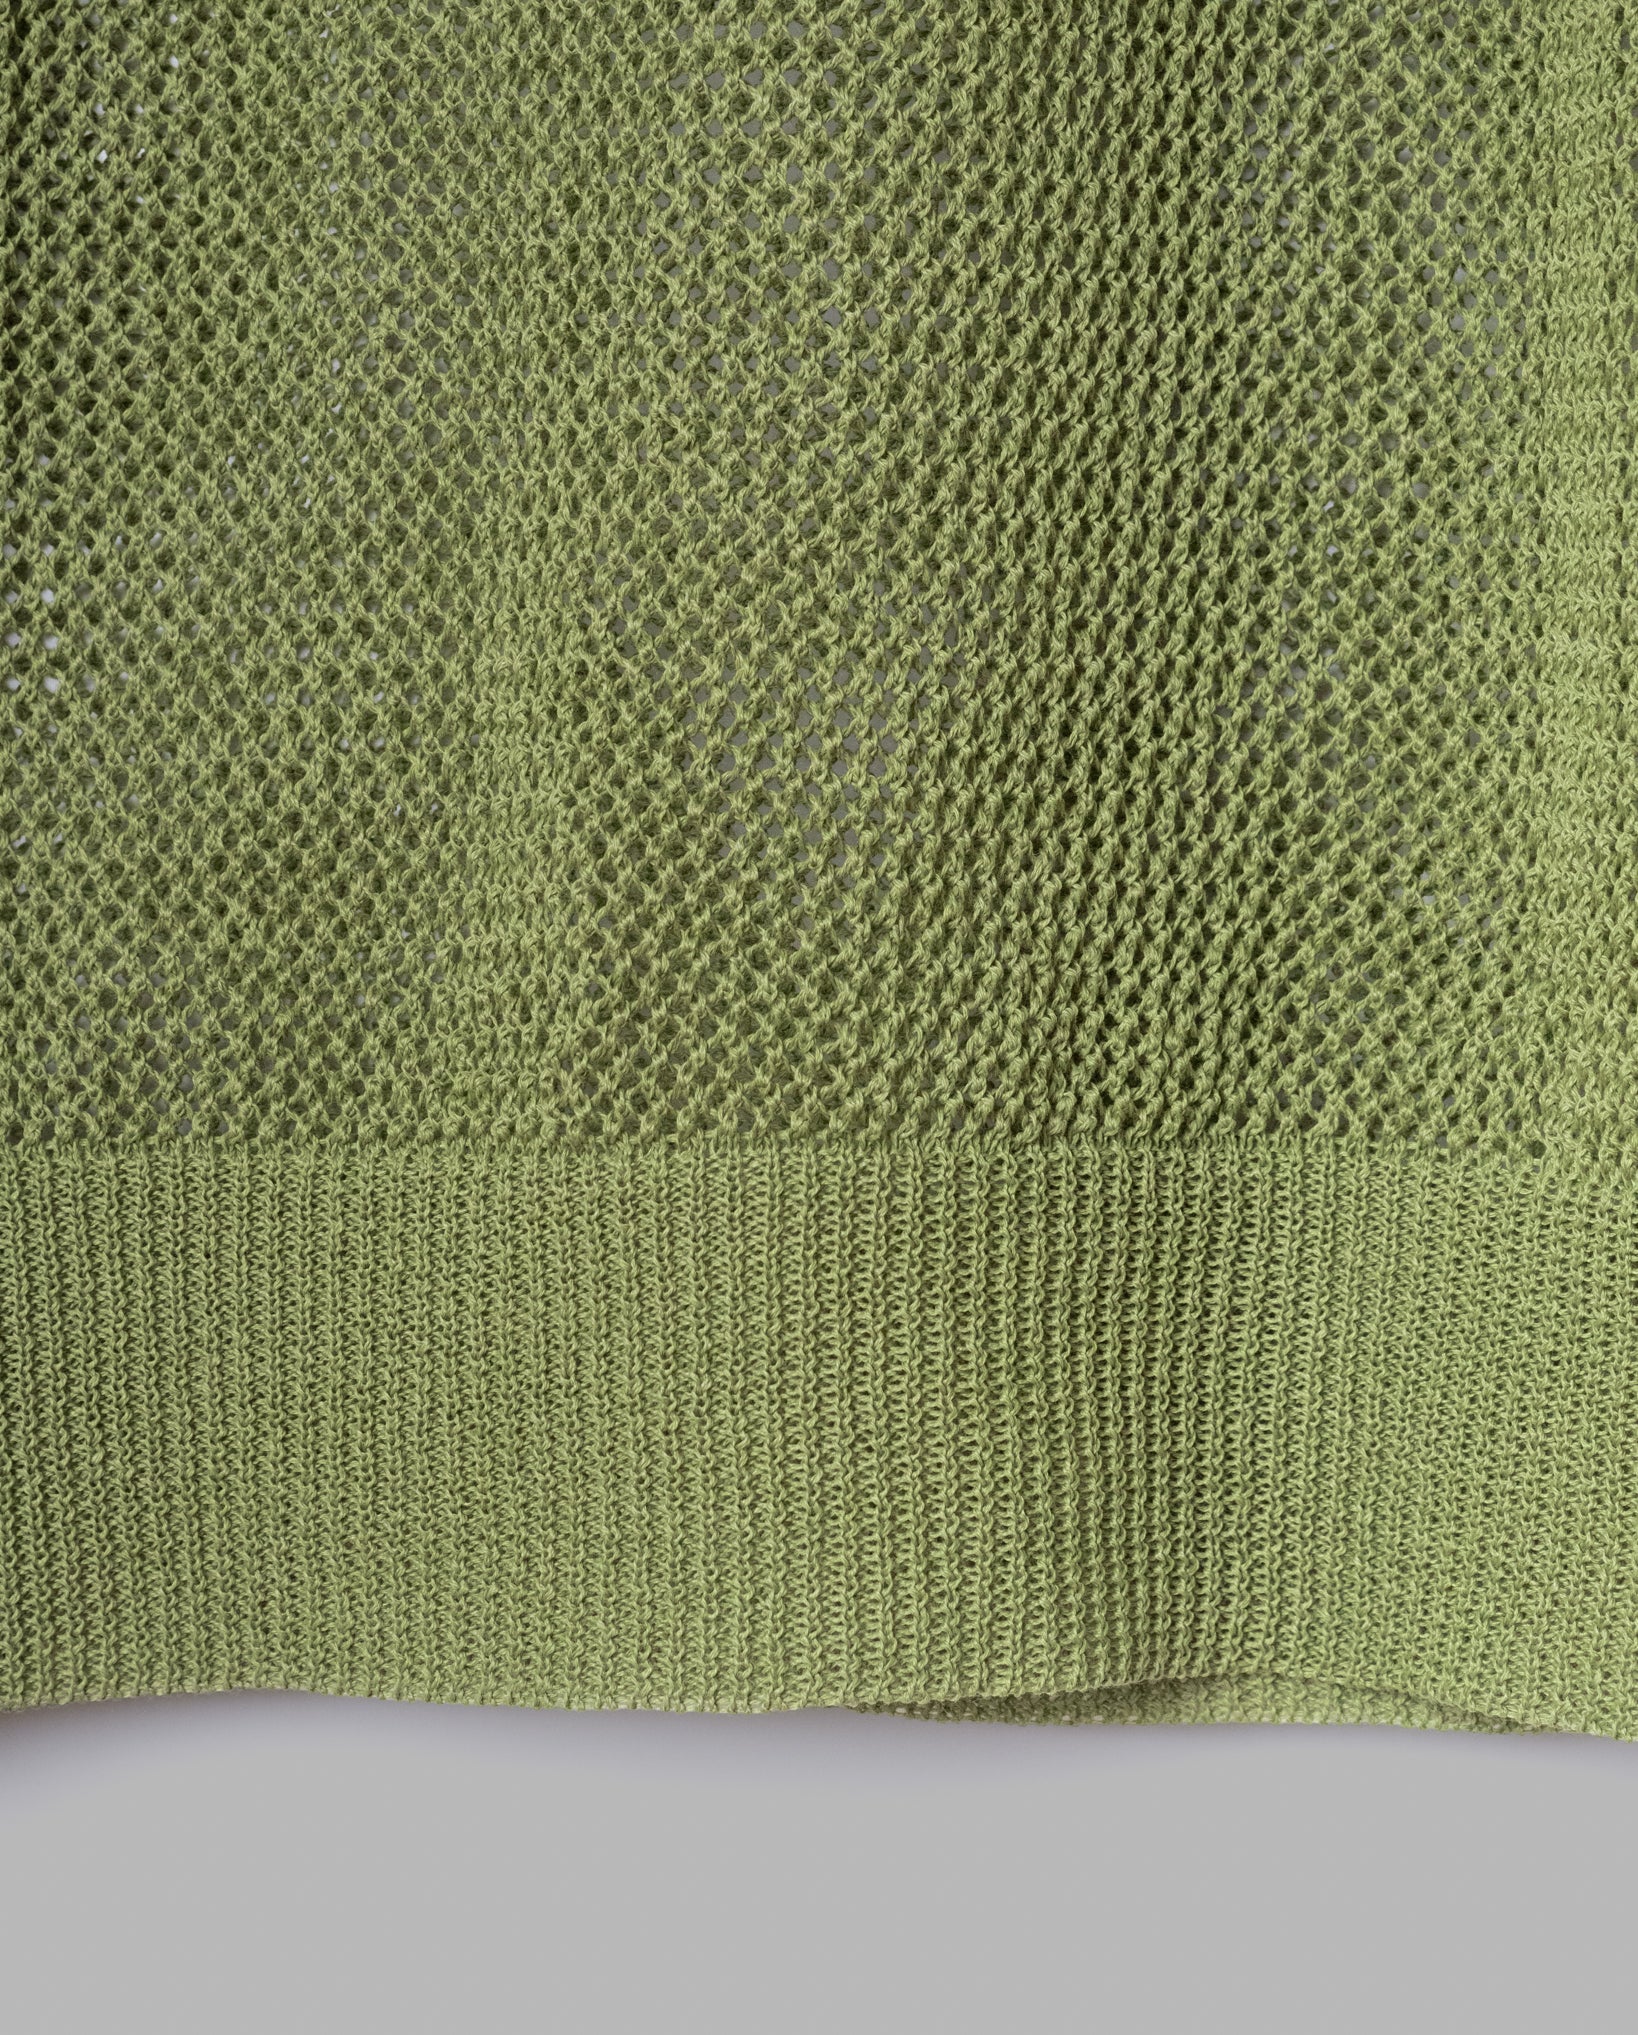 GIMA COTTON MESH KNIT PULLOVER SWEATER - GREEN